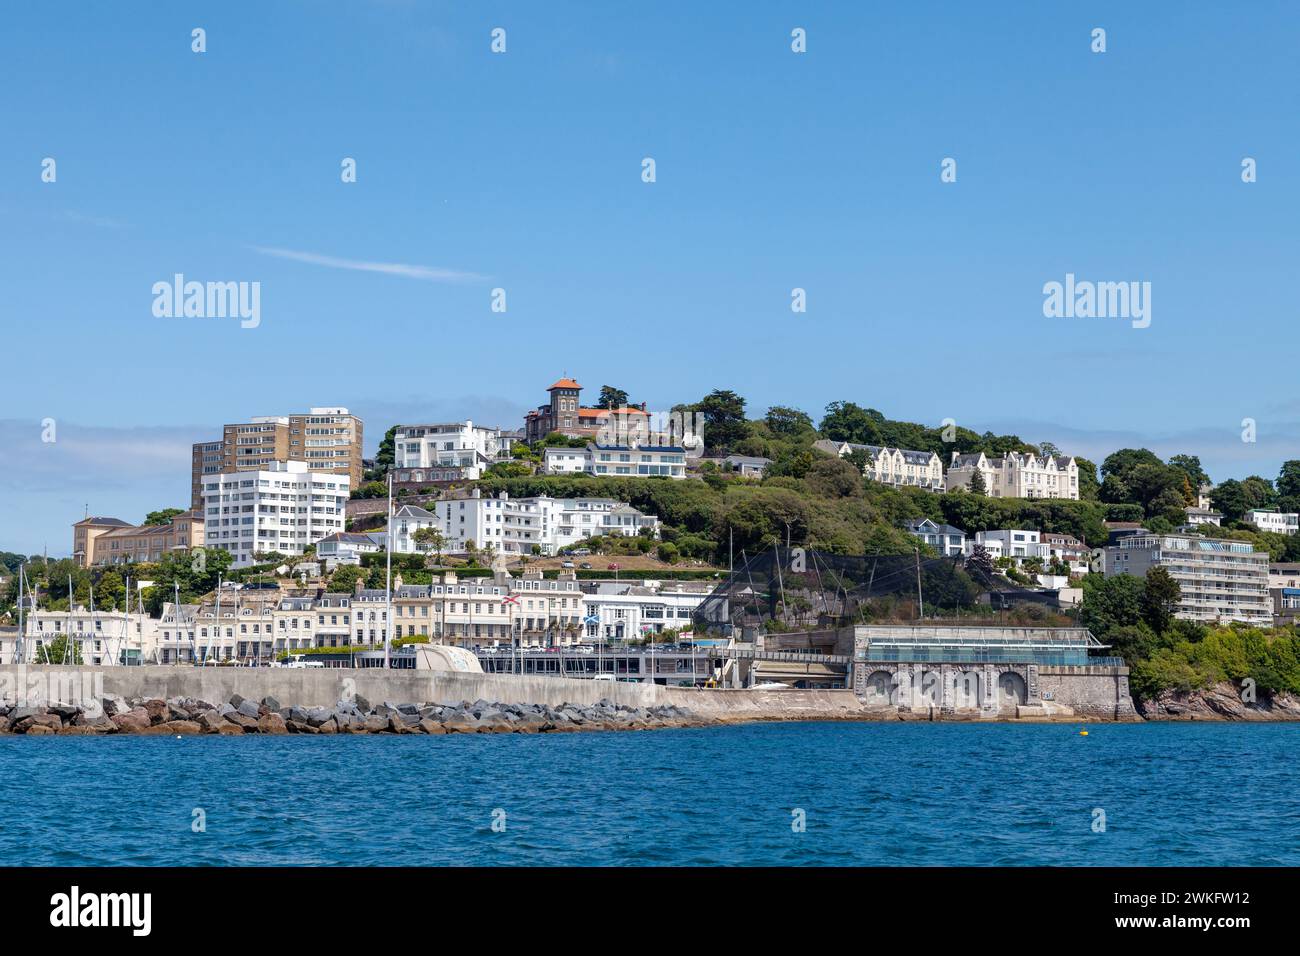 The seafront in Torquay seen from a boat on a summers day Stock Photo